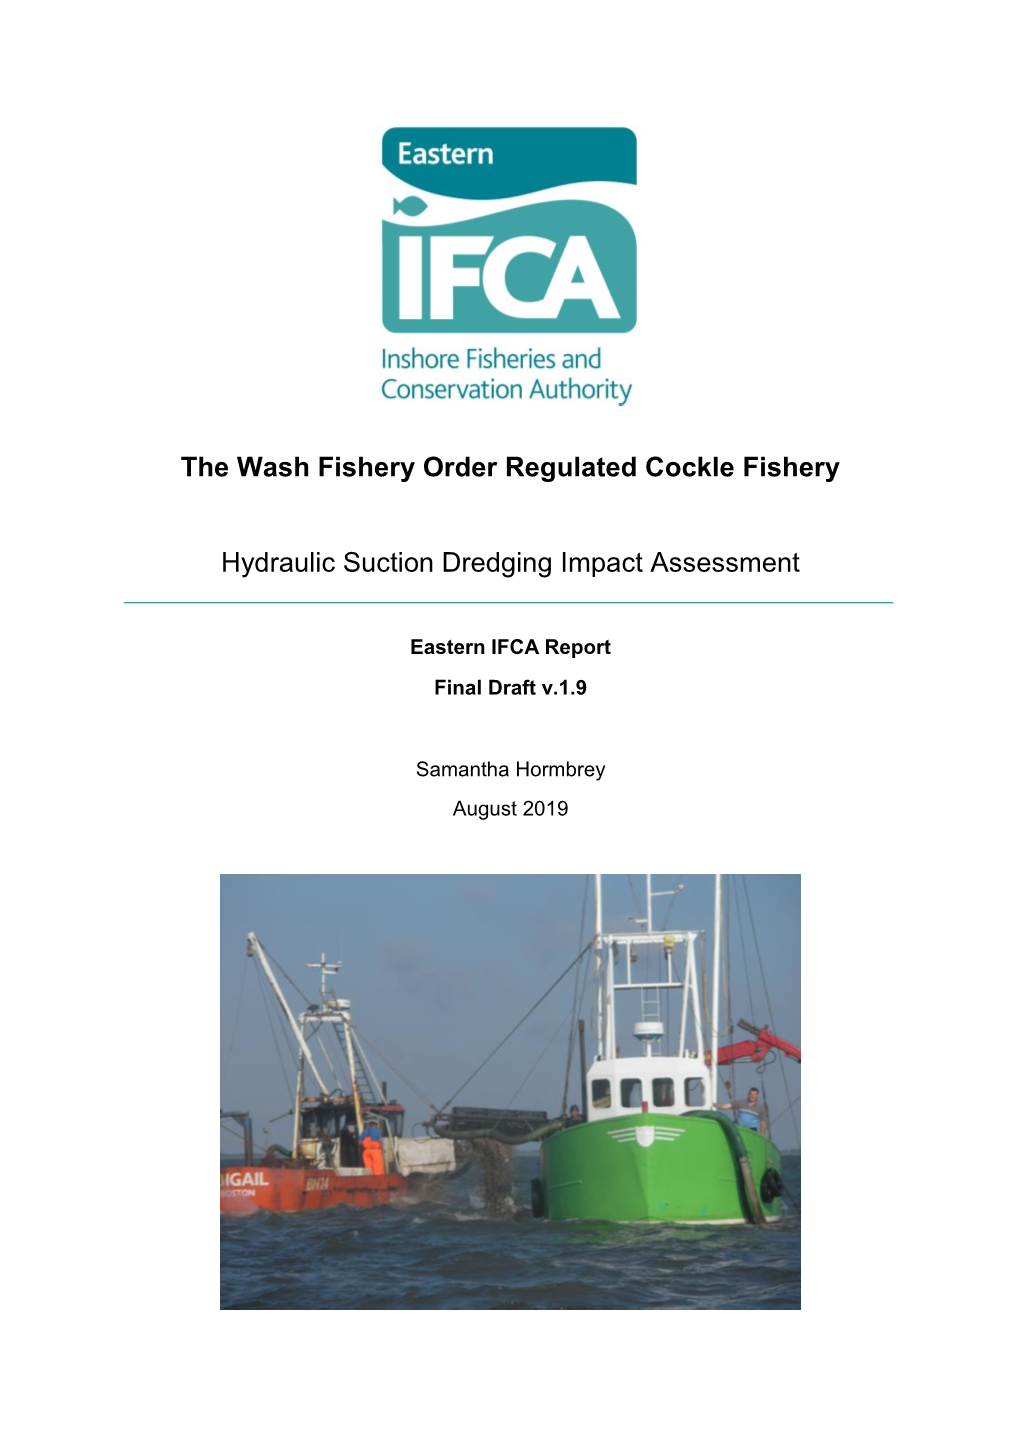 The Wash Fishery Order Regulated Cockle Fishery Hydraulic Suction Dredging Impact Assessment